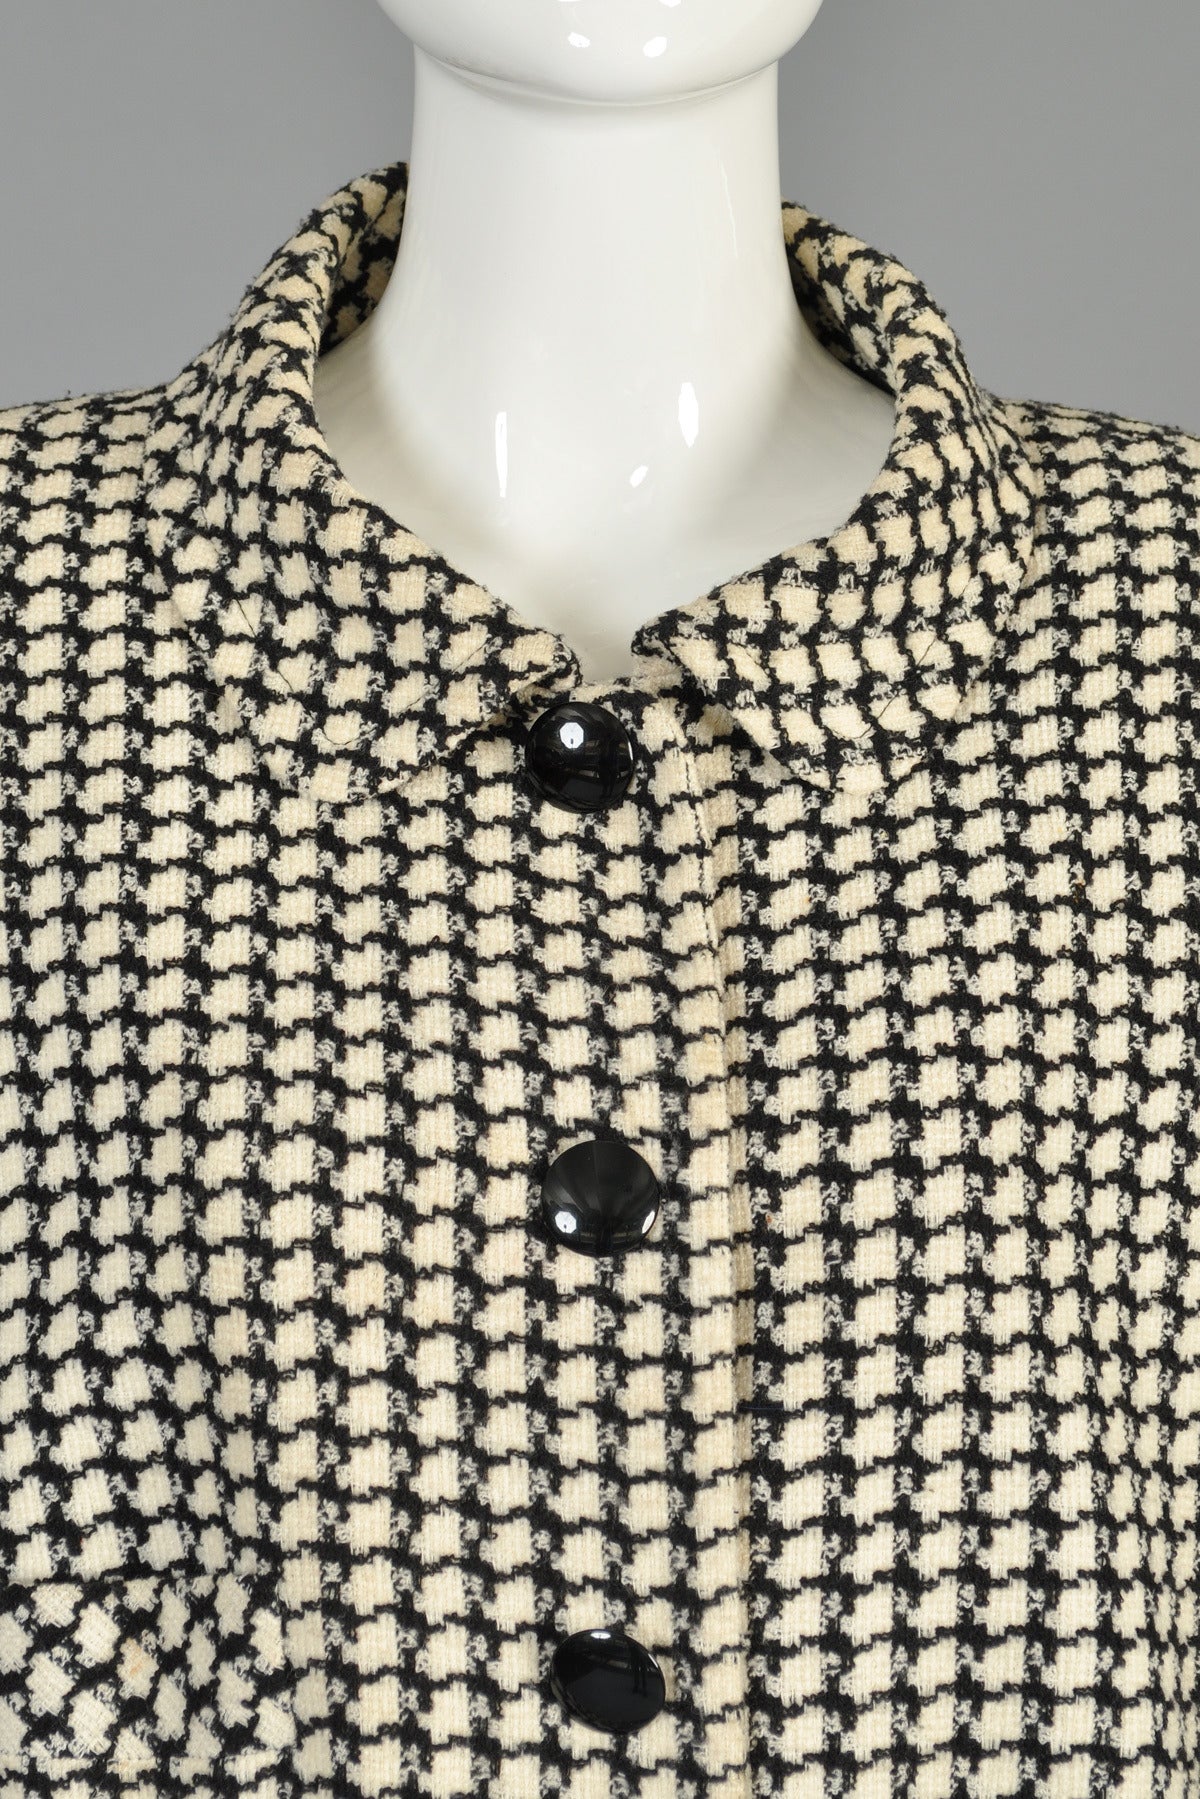 F/W 1993 Pierre Cardin Haute Couture Houndstooth Jacket with Vinyl Tie In Excellent Condition In Yucca Valley, CA